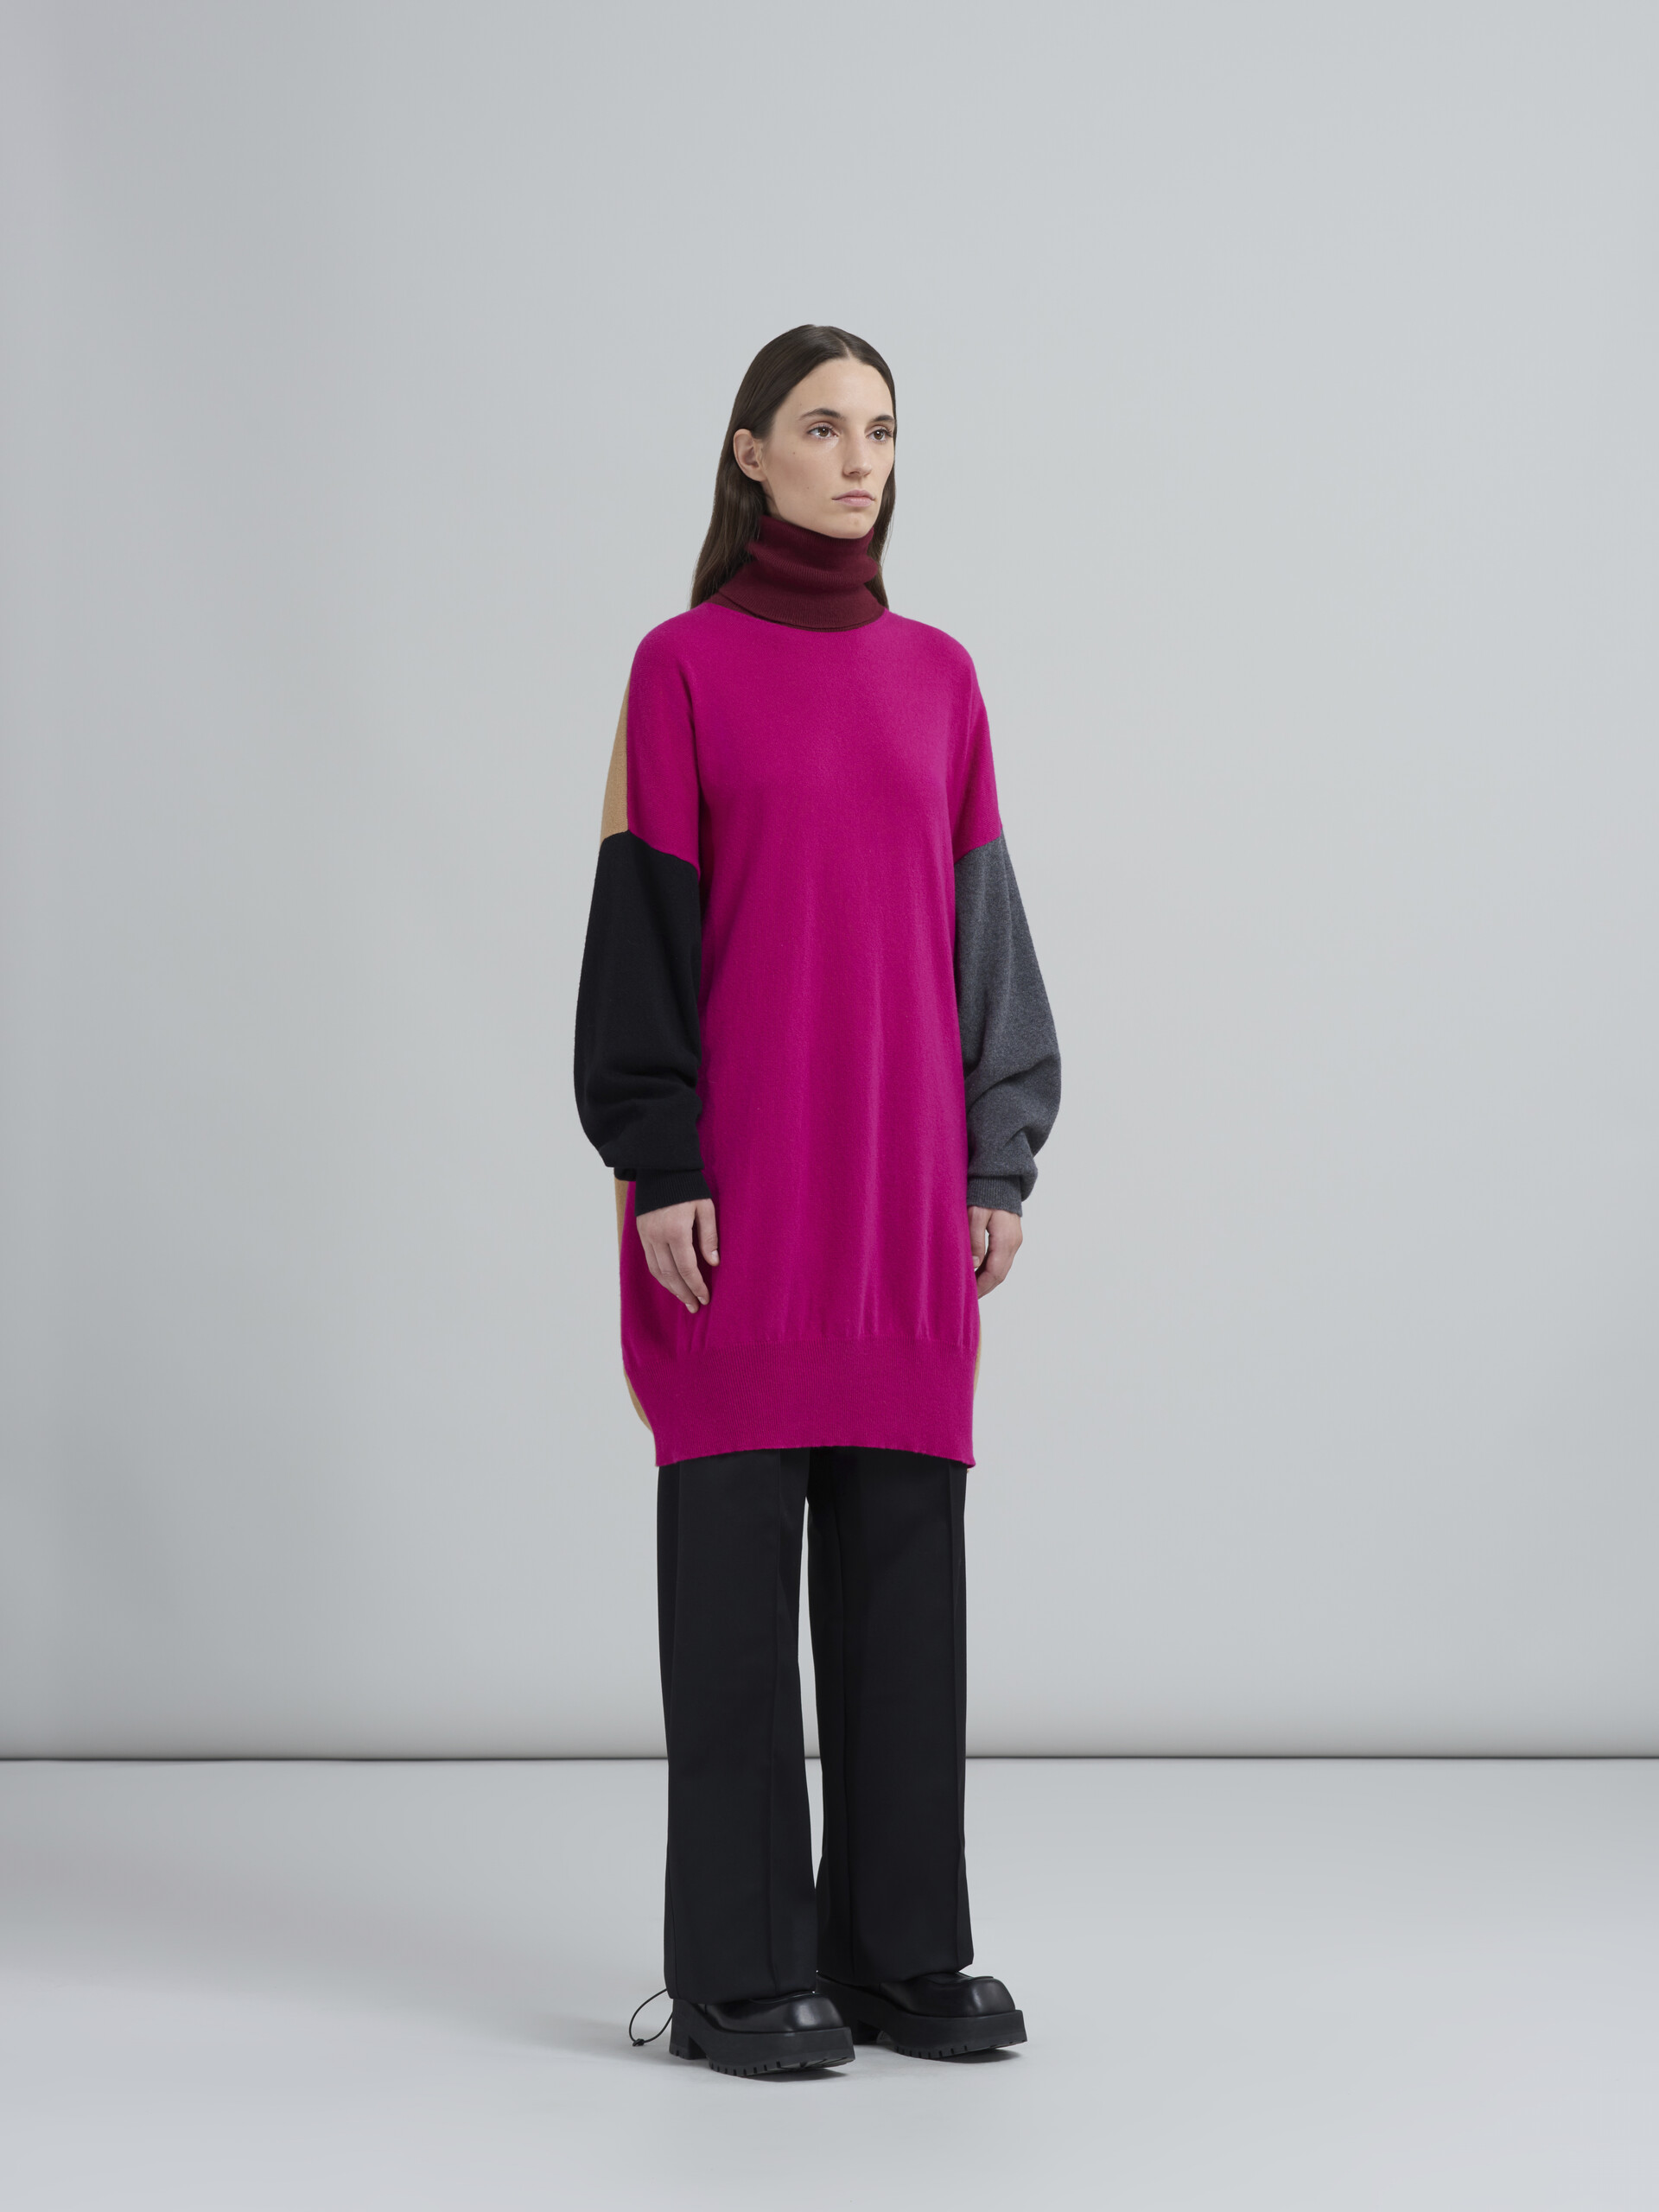 Colourblock wool and cashmere sweater - Pullovers - Image 5